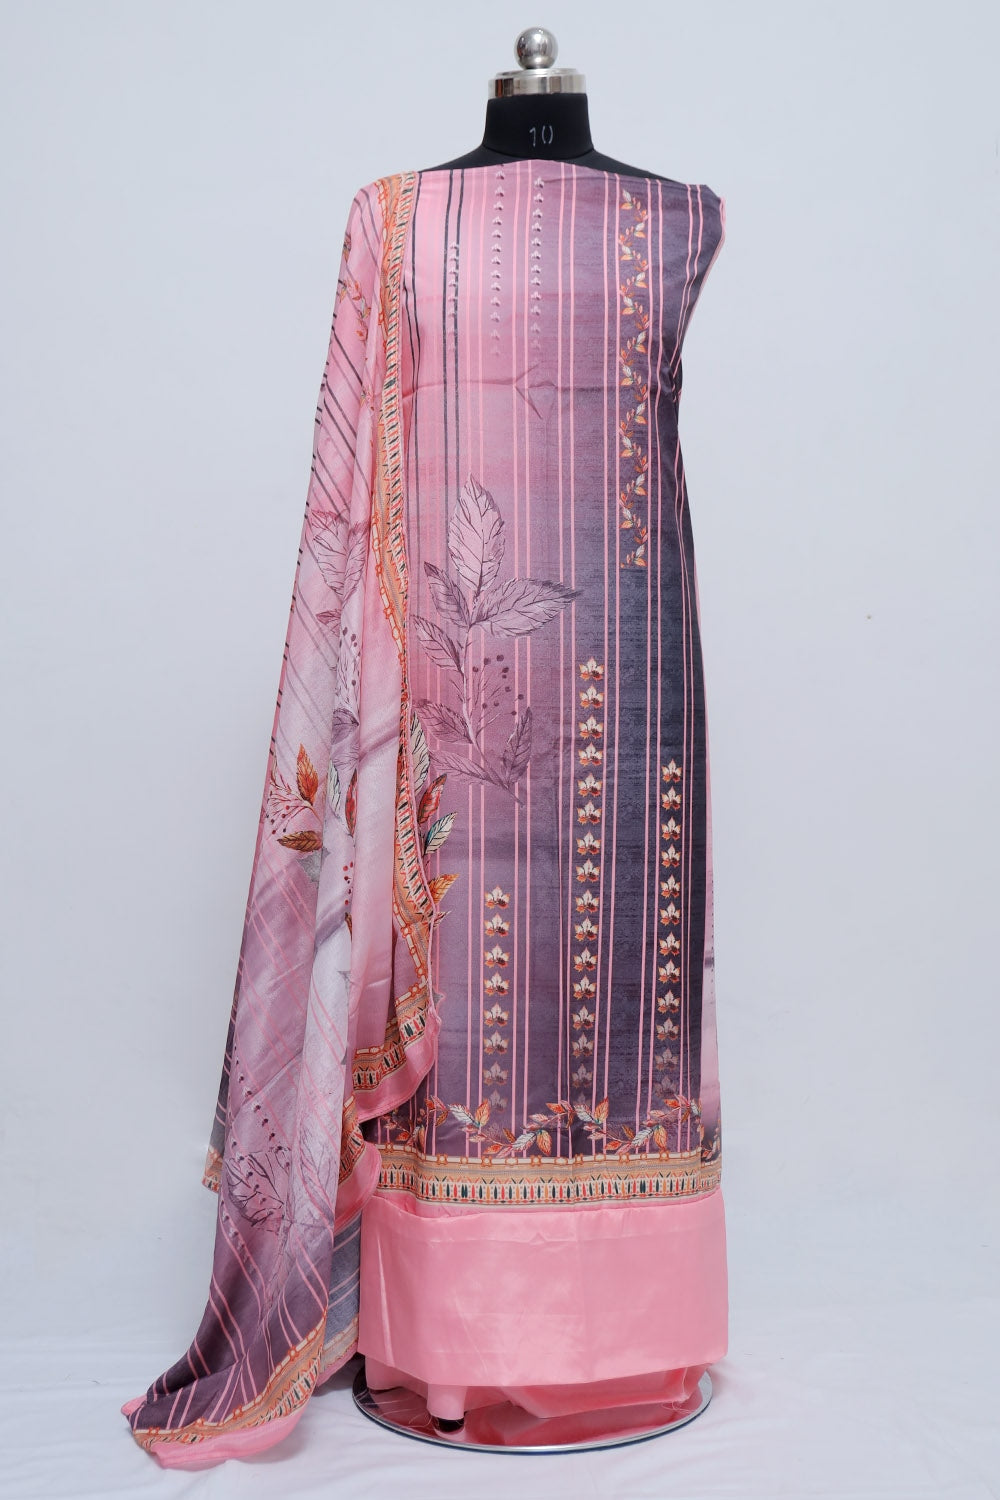 Charming Pink Colour Beautifully Printed Suit Known For Its